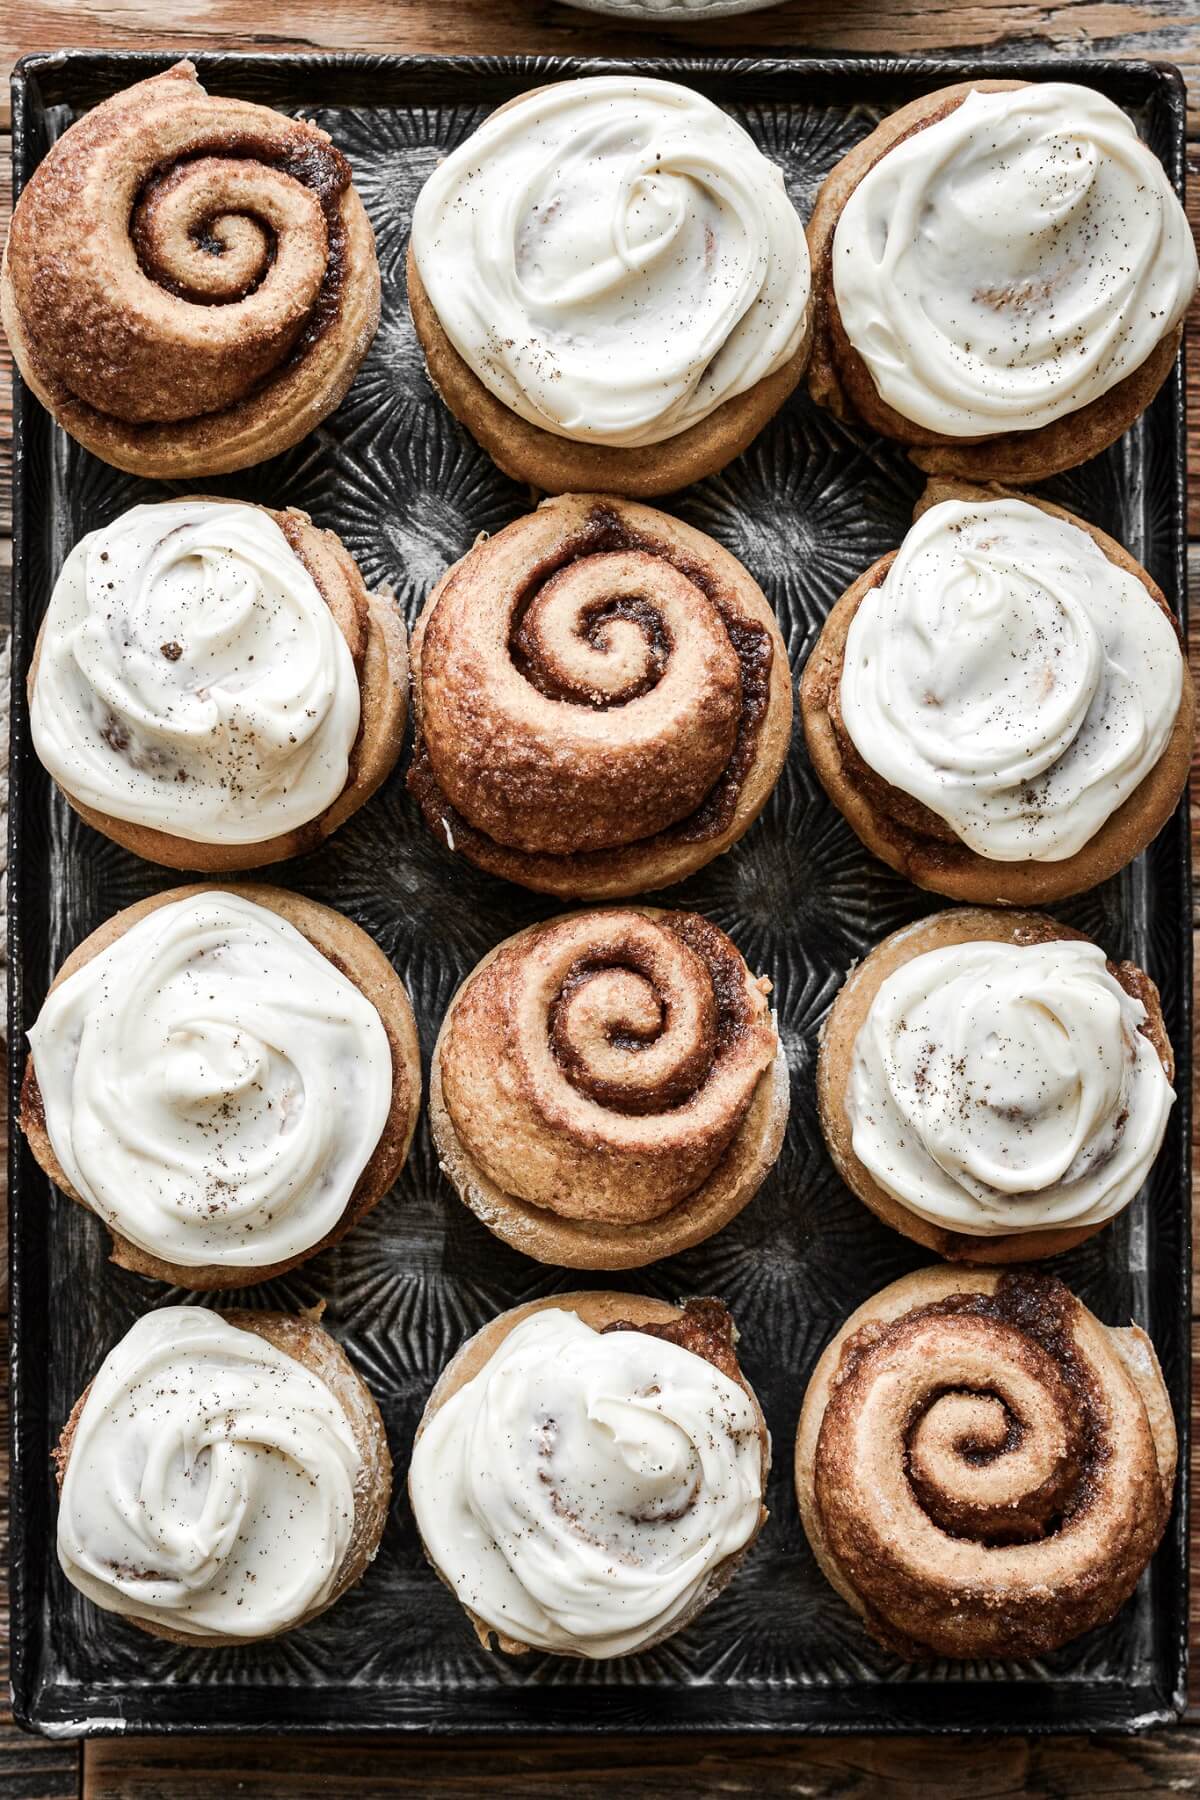 Gingerbread cinnamon rolls with cream cheese frosting on a baking sheet.